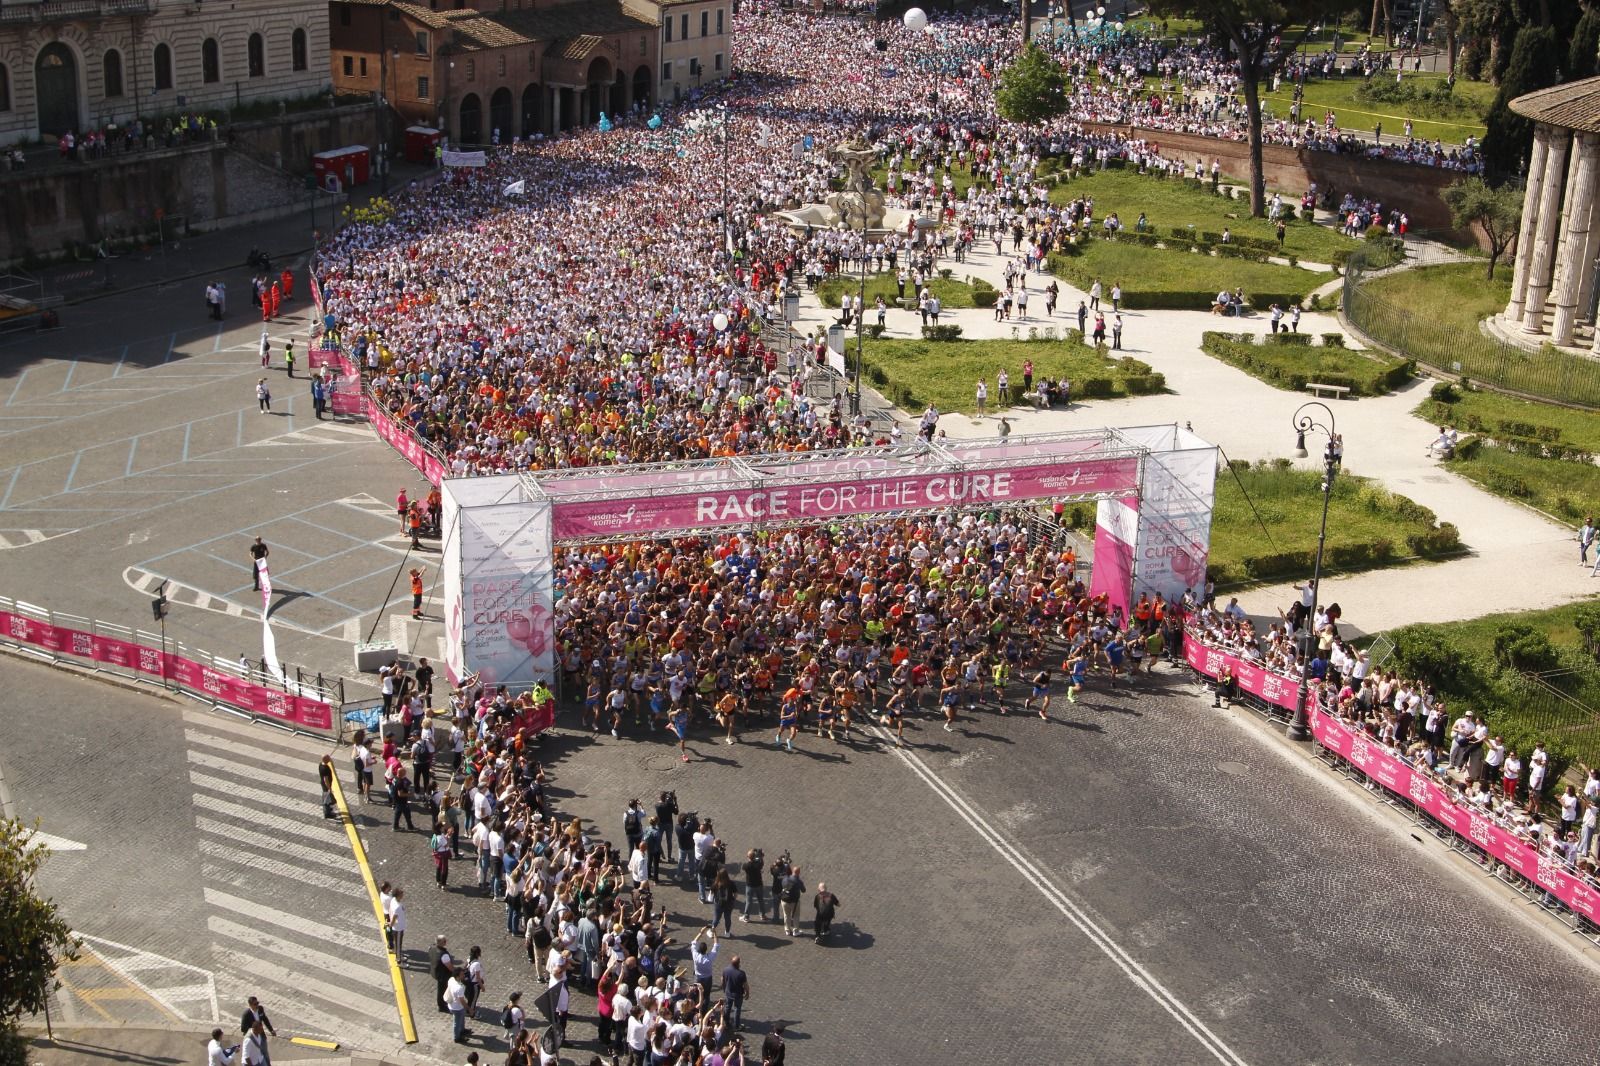 Race for the Cure, register with over 70,000 supporters at the Rome news agency Italpress